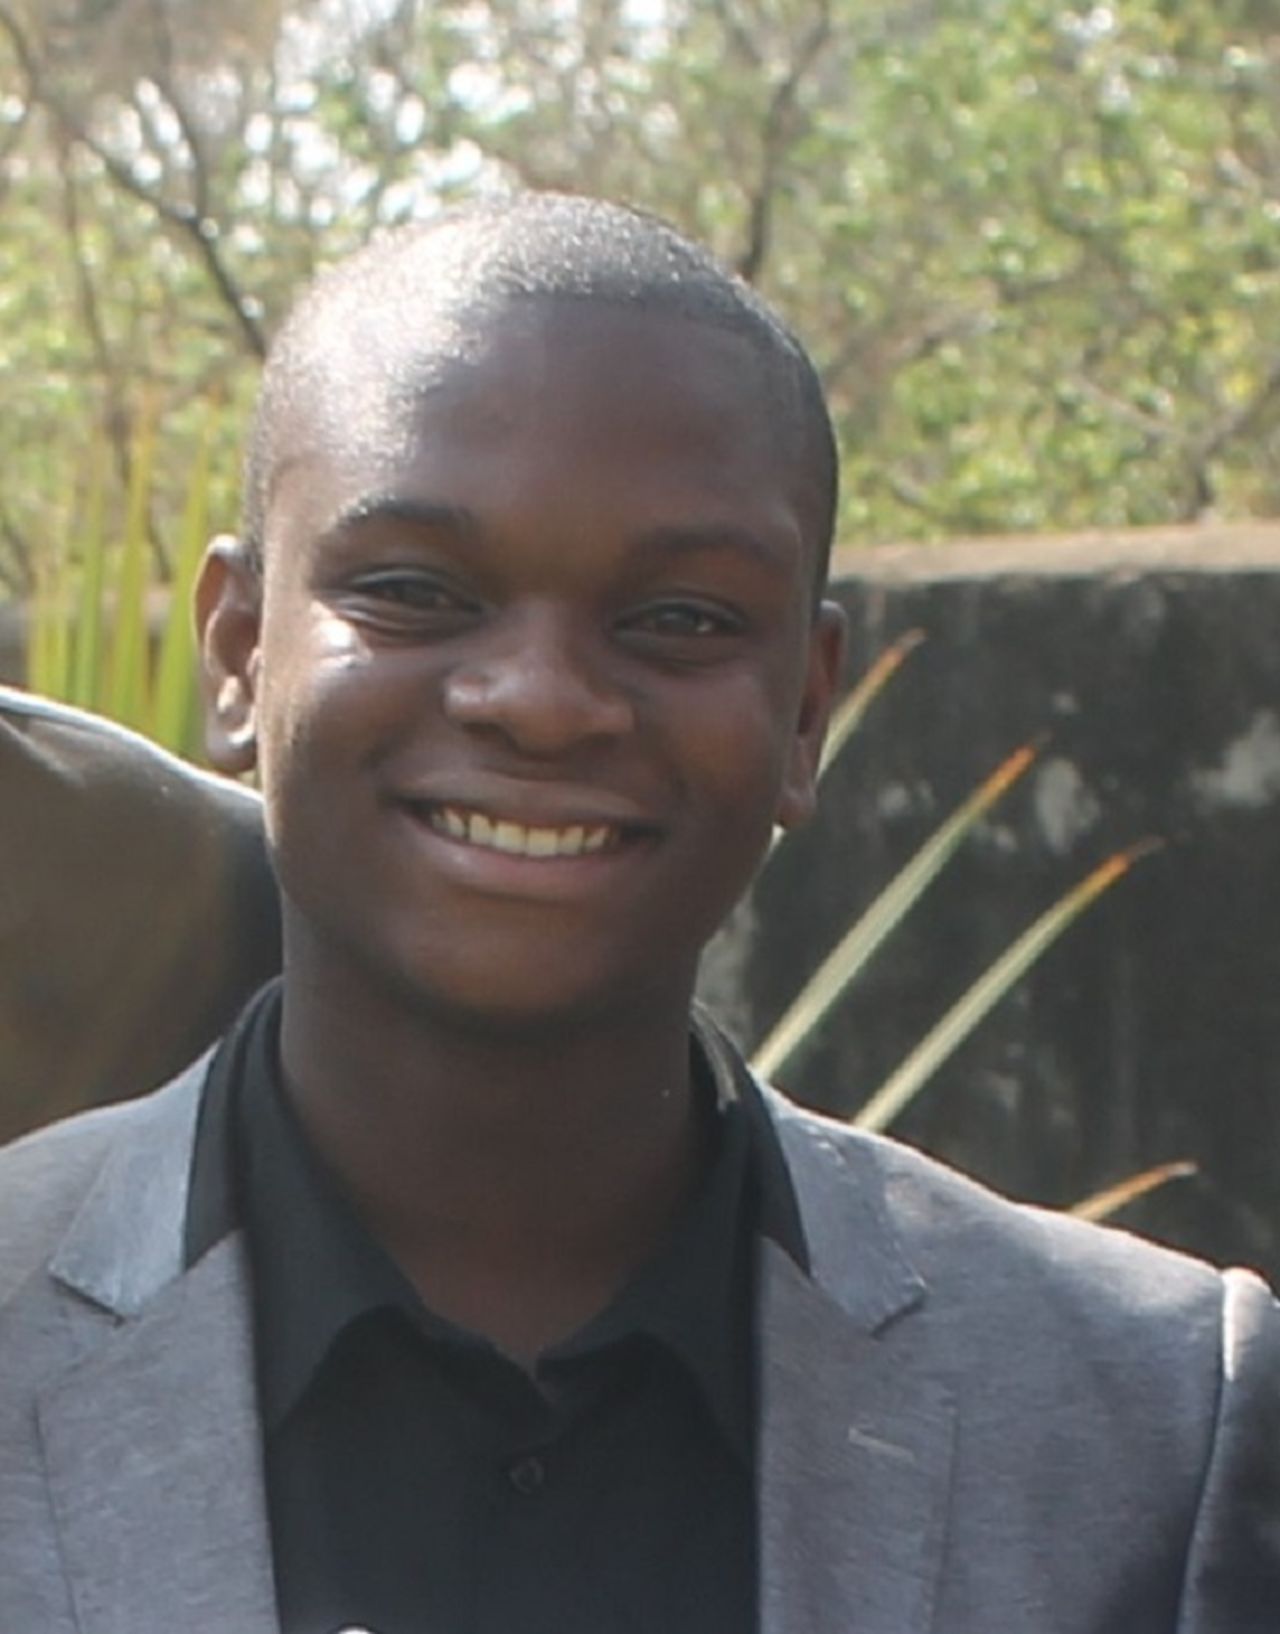 In 2014 Farai Munjoma created Shasha Iseminar, an online education platform that provides an online library of course notes, past exam papers and career guidance for high school students in Zimbabwe. Some of the revenue generated by the service is used to contribute to school fees for marginalized rural students.